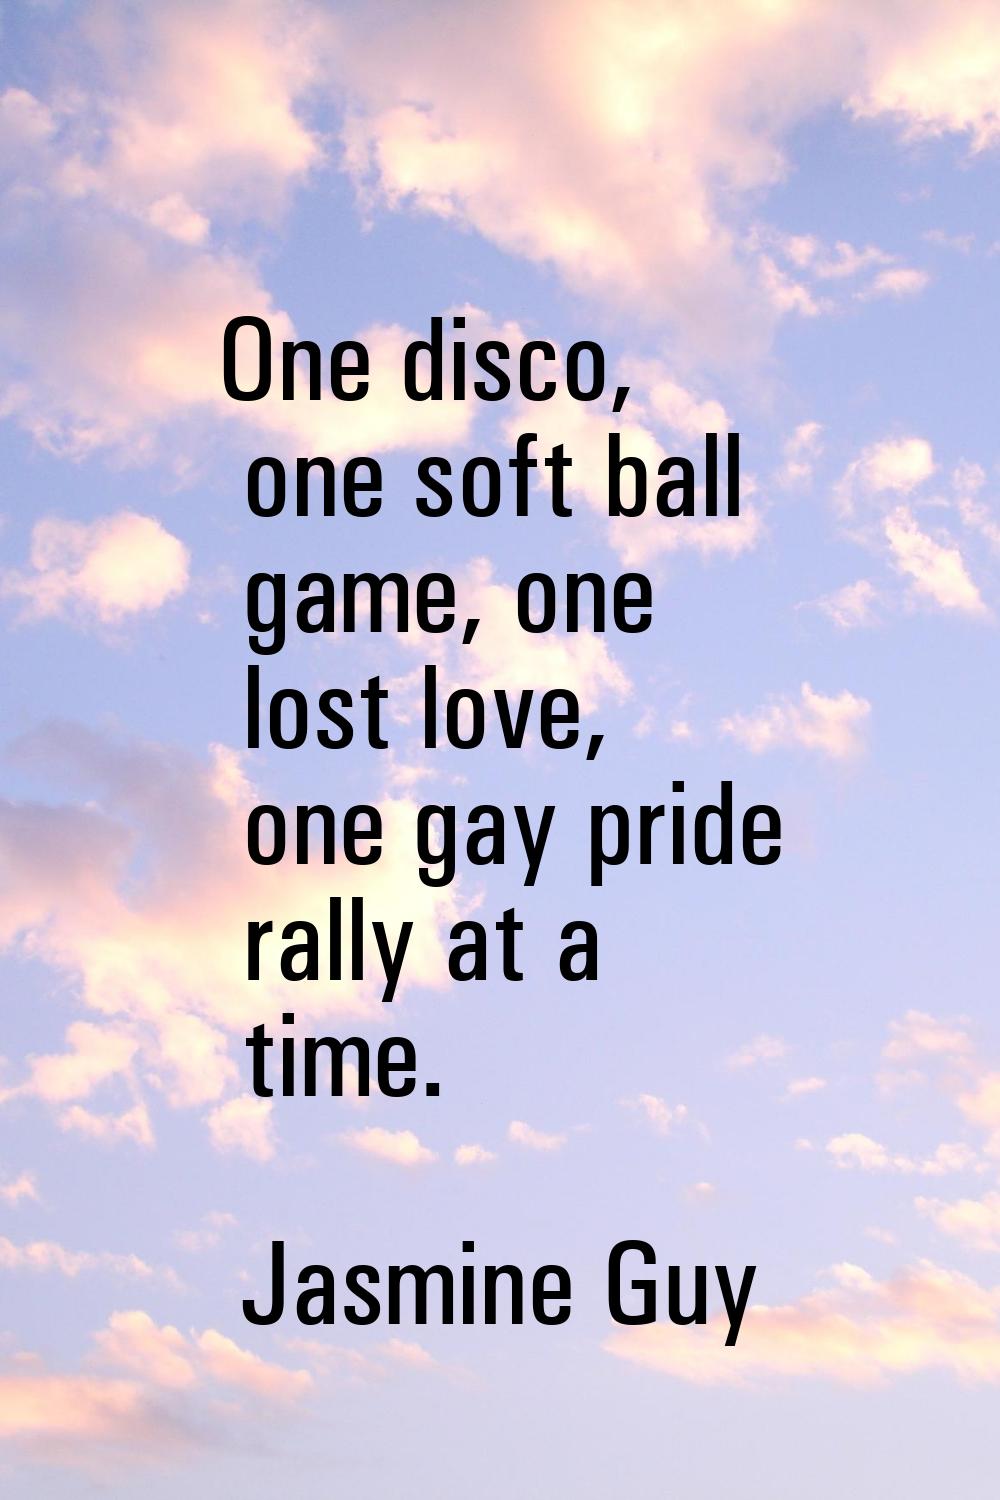 One disco, one soft ball game, one lost love, one gay pride rally at a time.